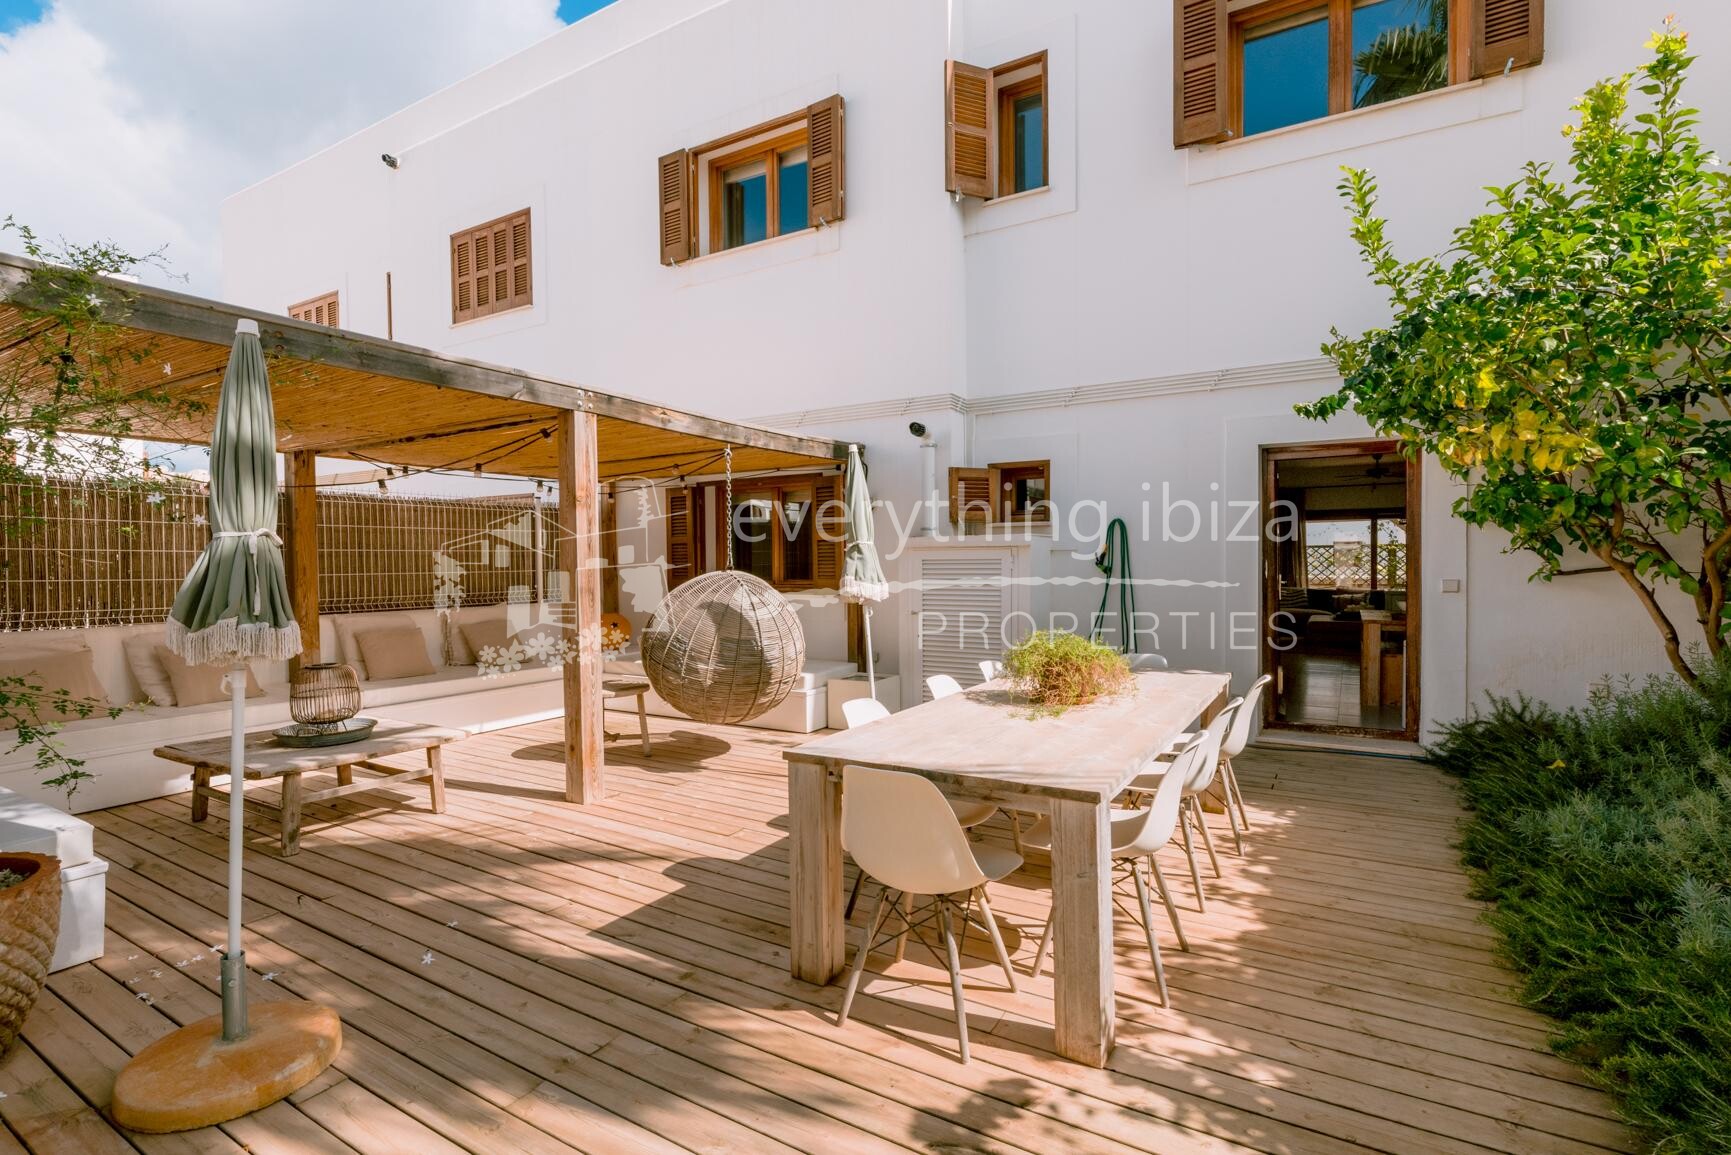 Modern Four Bedroom Townhouse in San Jose Village, ref. 1648, for sale in Ibiza by everything ibiza Properties